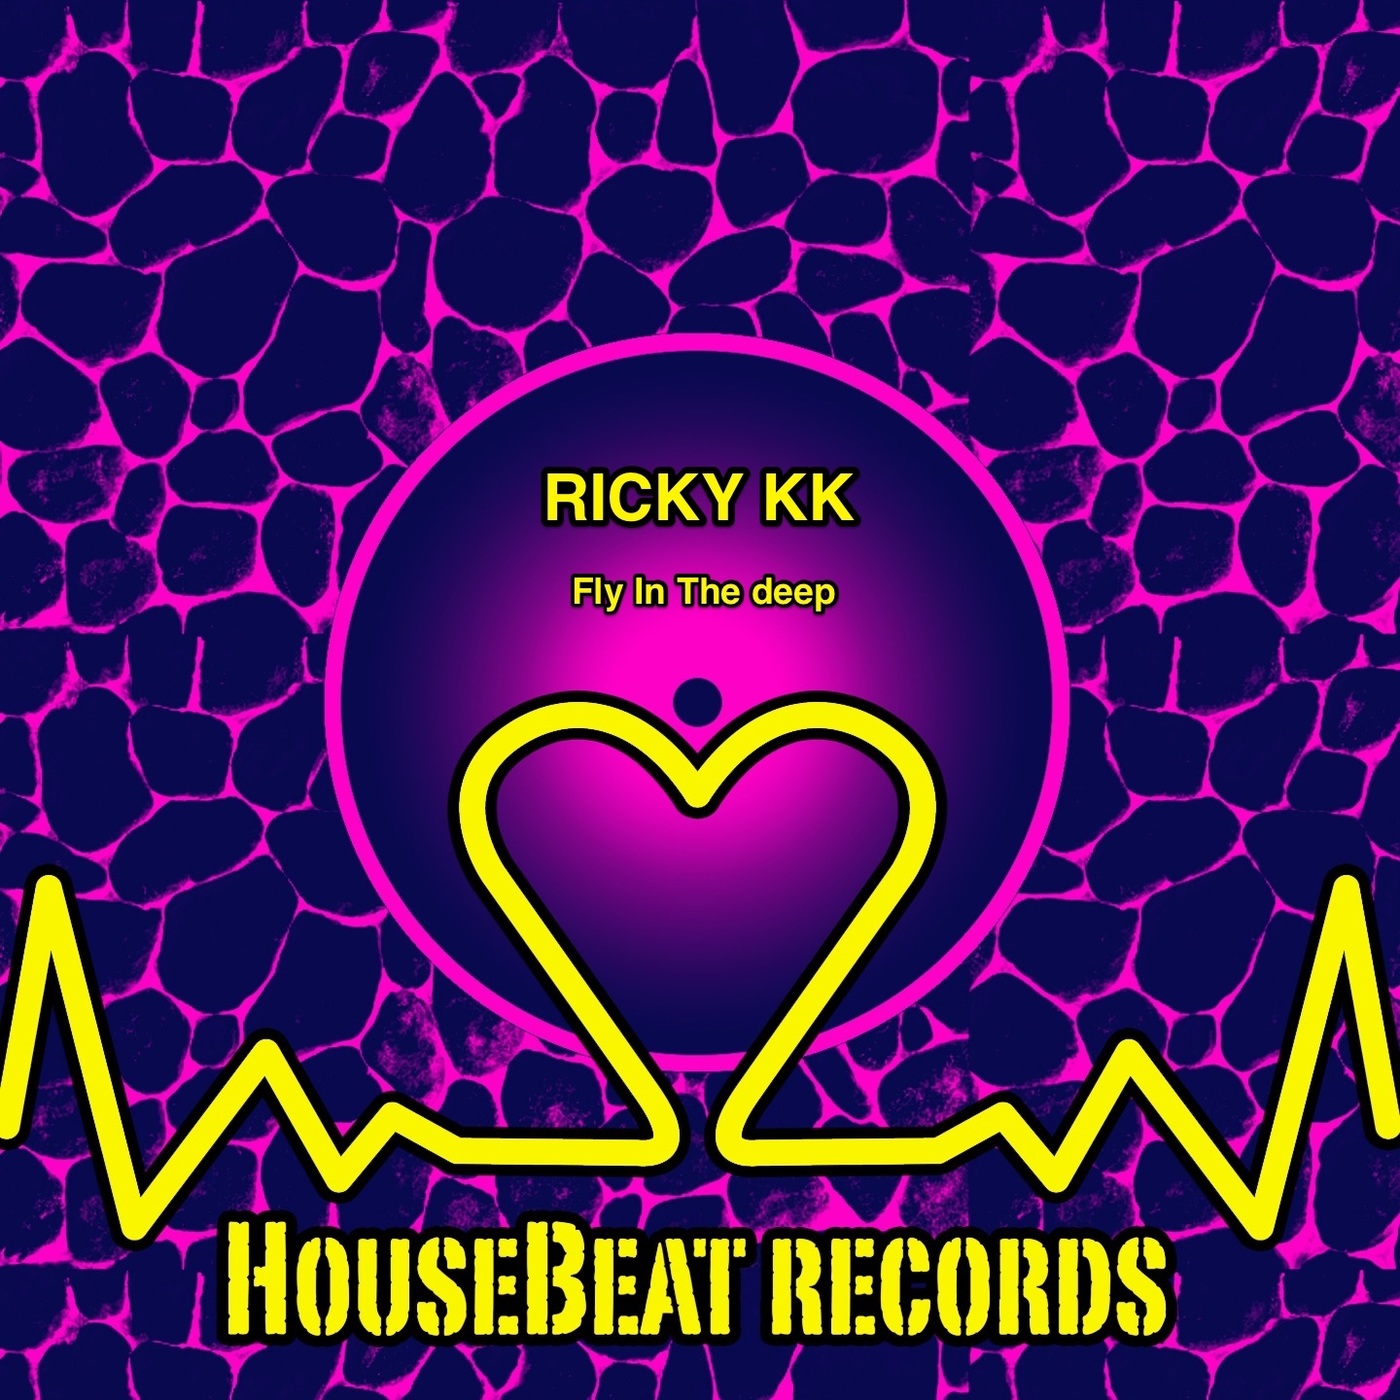 Ricky KK - Fly in the Deep / HouseBeat Records